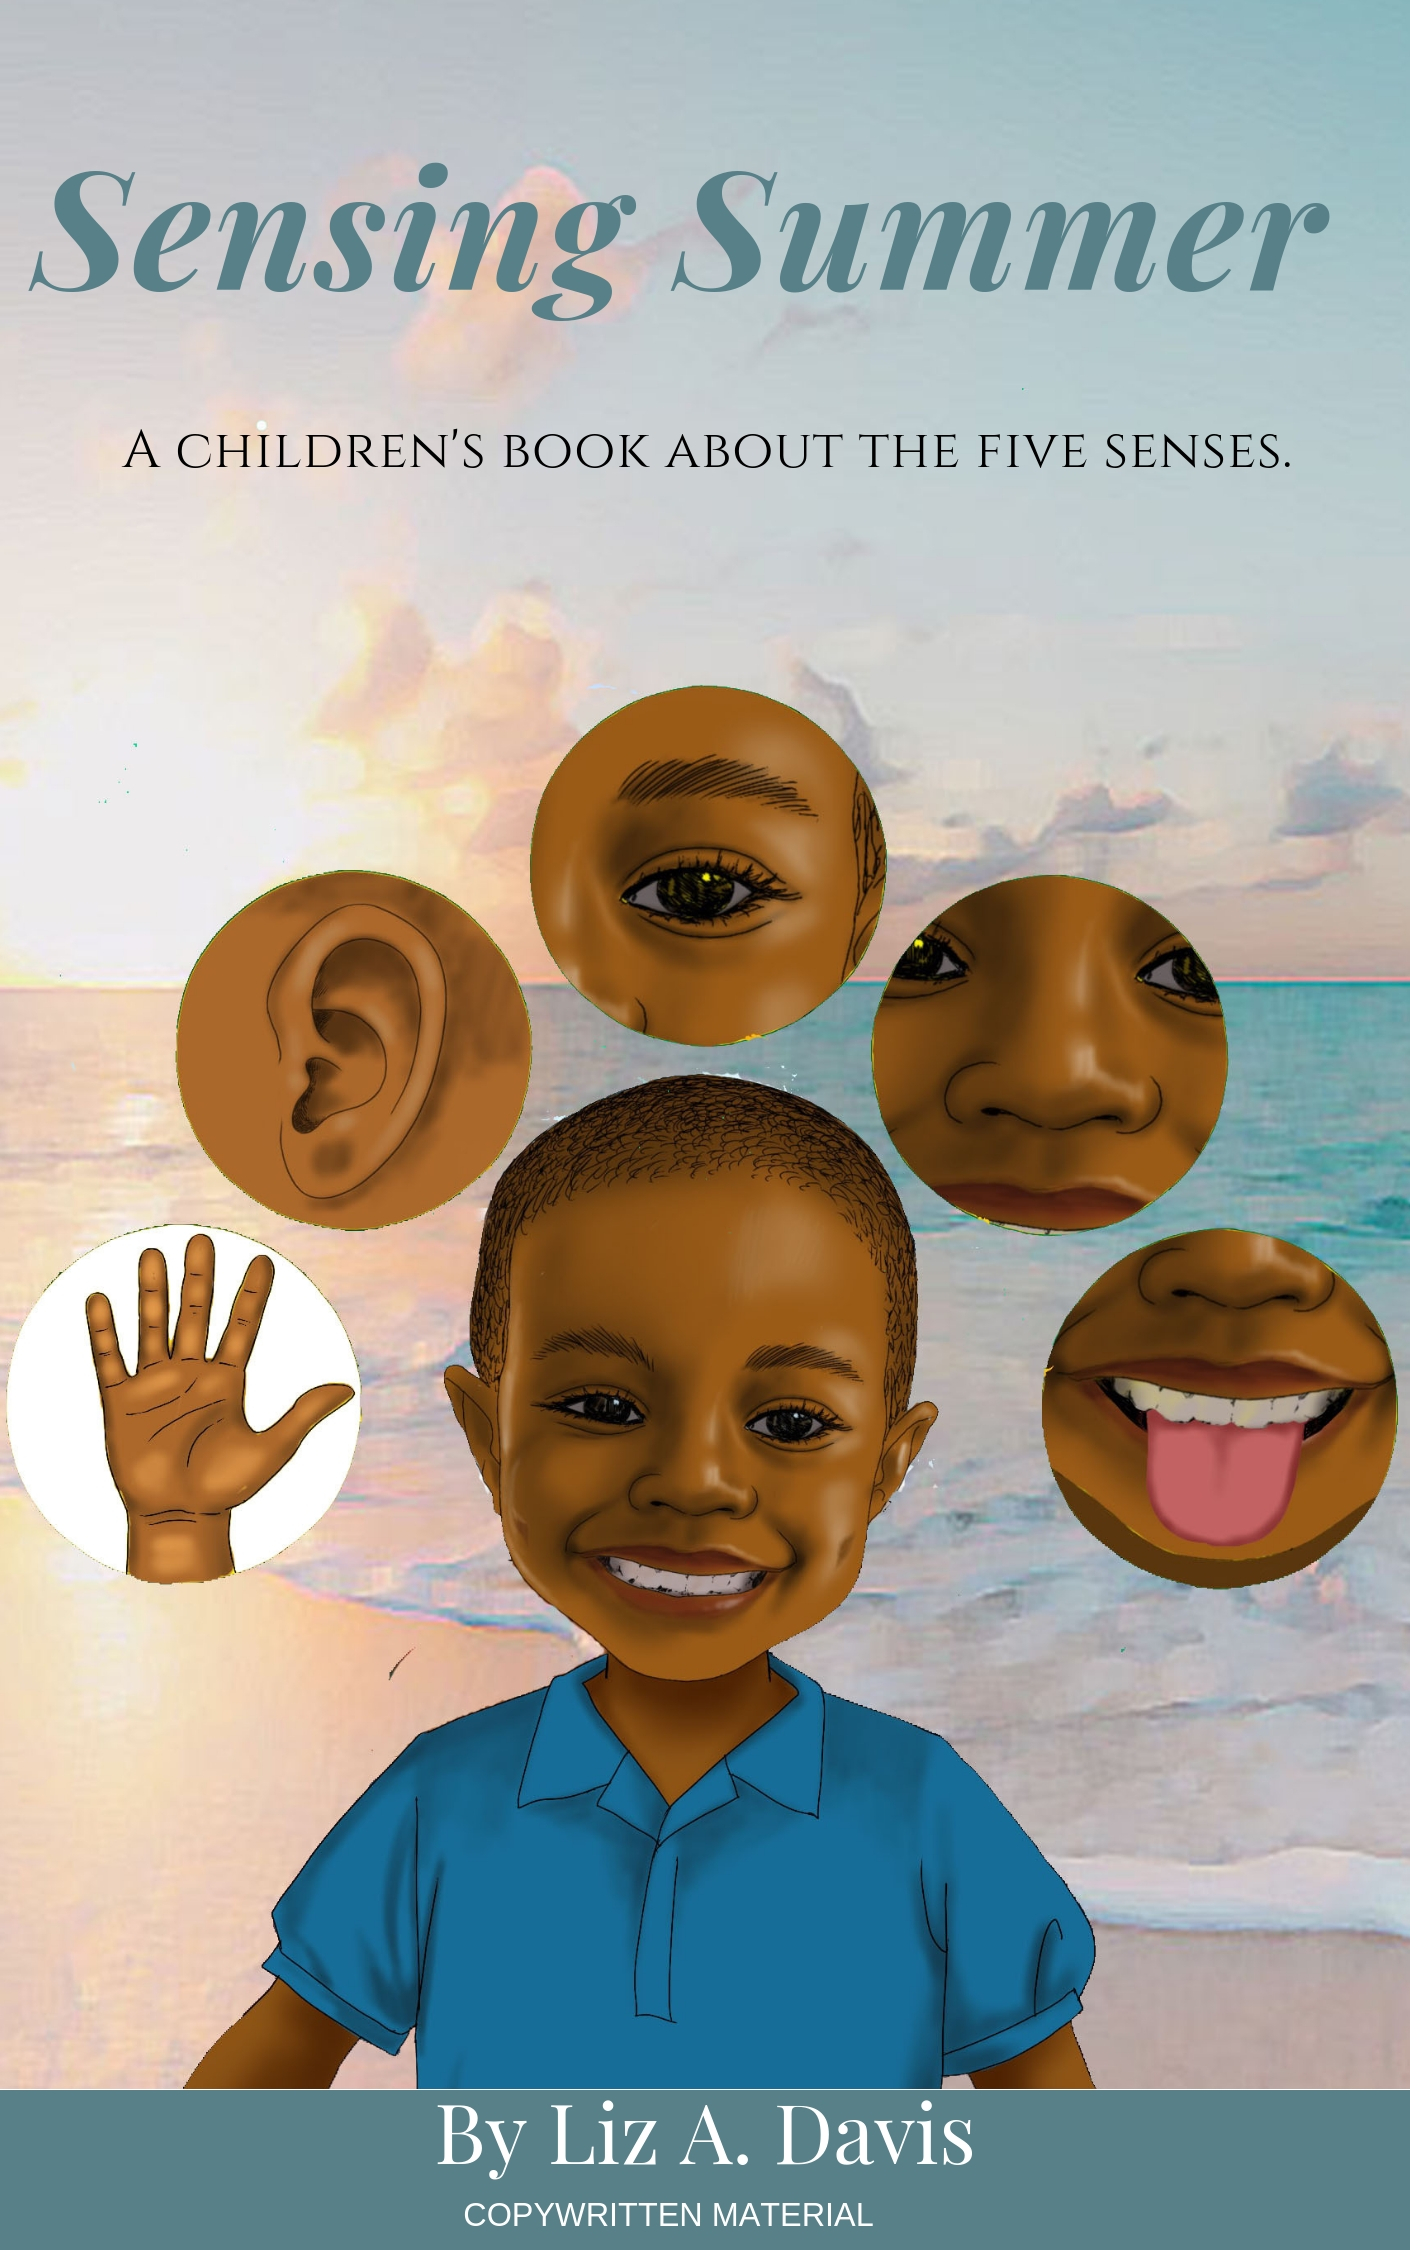 Children's EBook I Can Count on Spring & Sensing Summer Available on Amazon.com